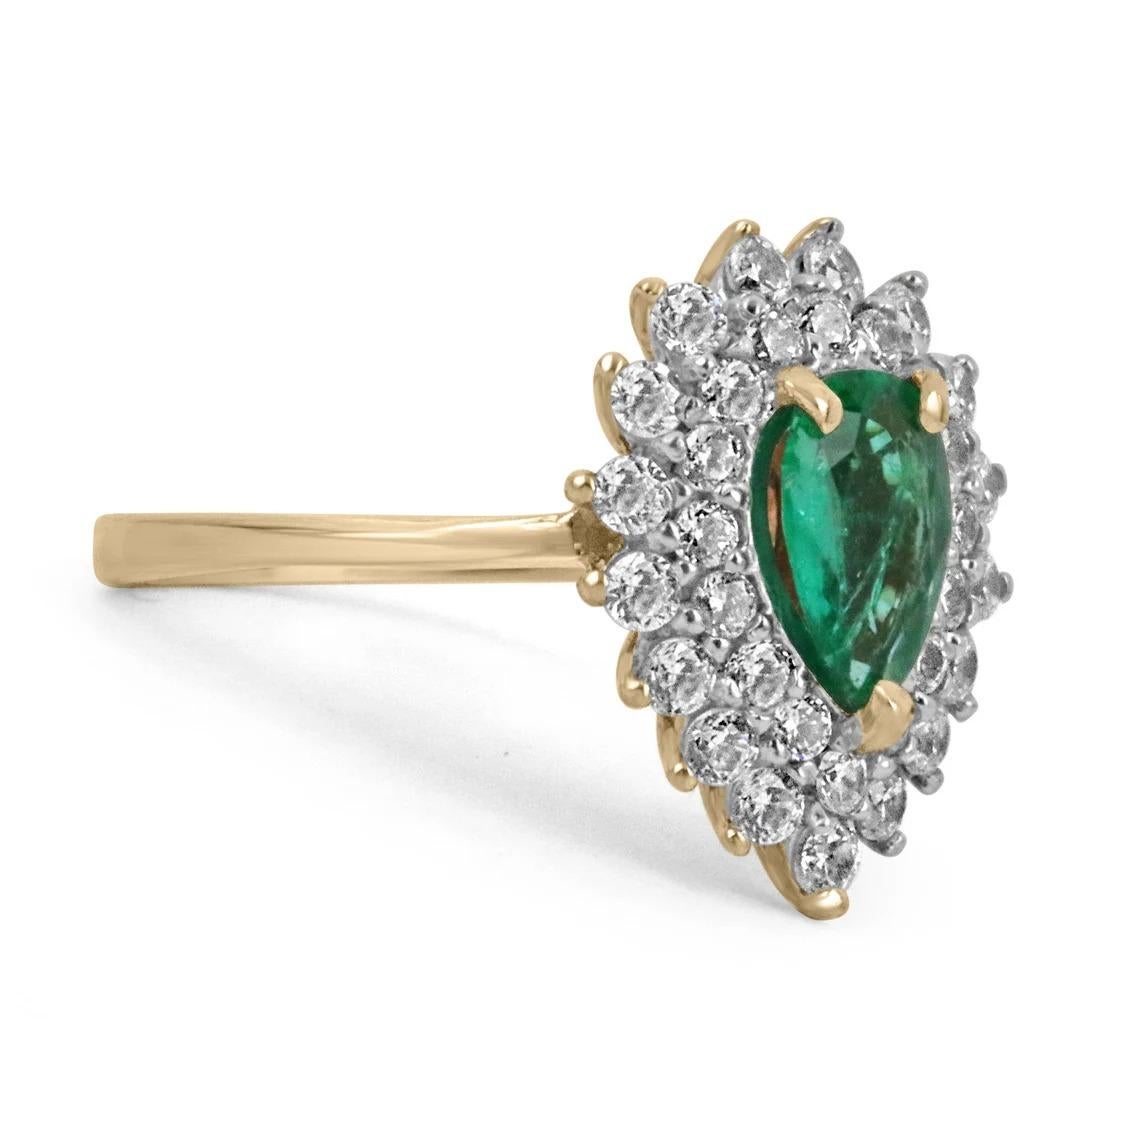 A stunning emerald and diamond ring. The center stone features a gorgeous 0.55-carat, natural Zambian emerald, with superb characteristics. Dark vivid green color, and excellent luster are some of the few. Surrounding the gem is a double halo of